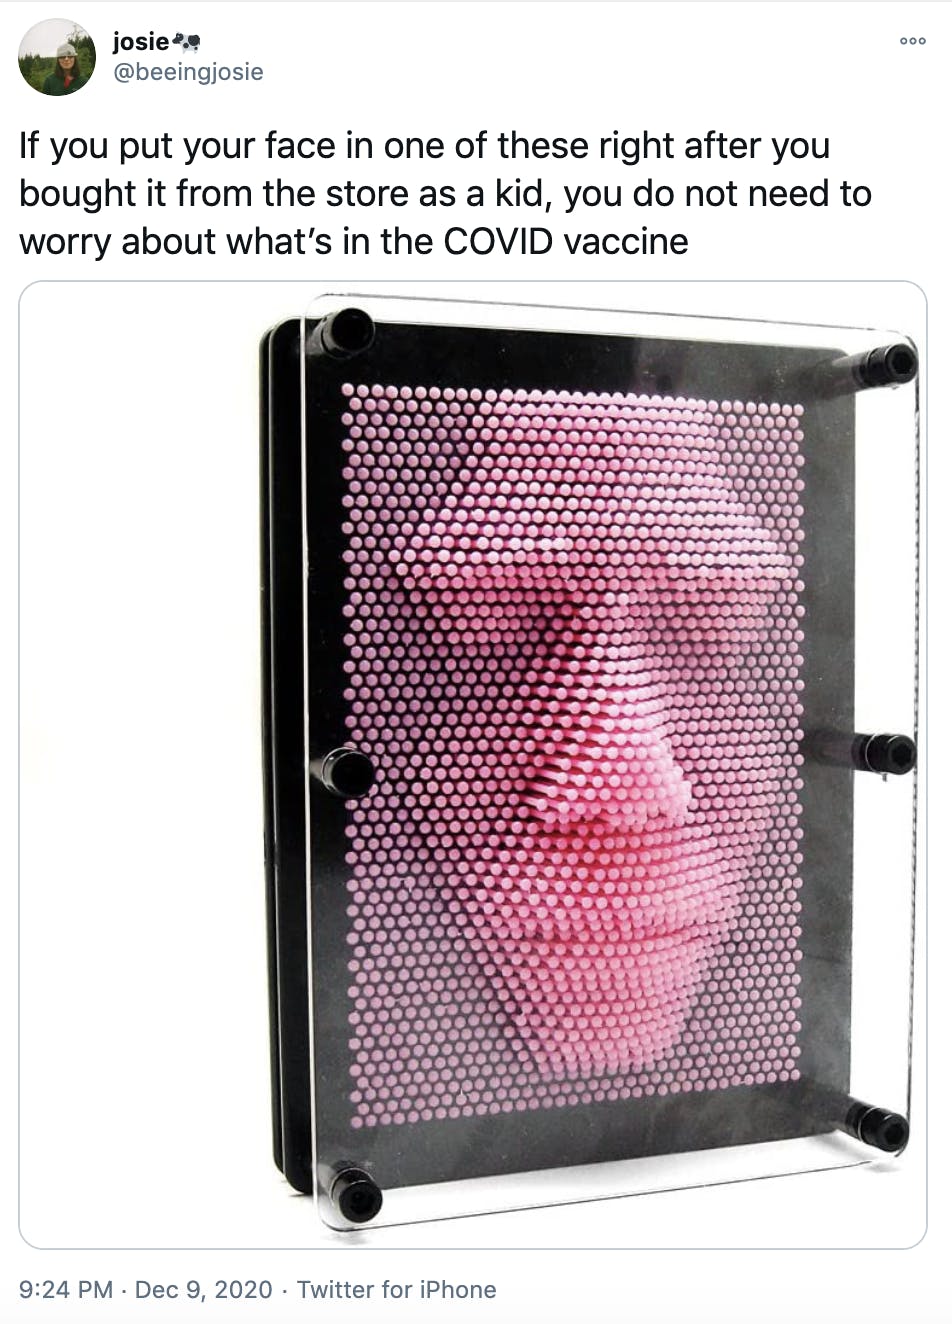 'If you put your face in one of these right after you bought it from the store as a kid, you do not need to worry about what’s in the COVID vaccine' picture of one of those puzzle toys that lets you make 3D images by pushing the nails in and out, it's pink and currently showing a face